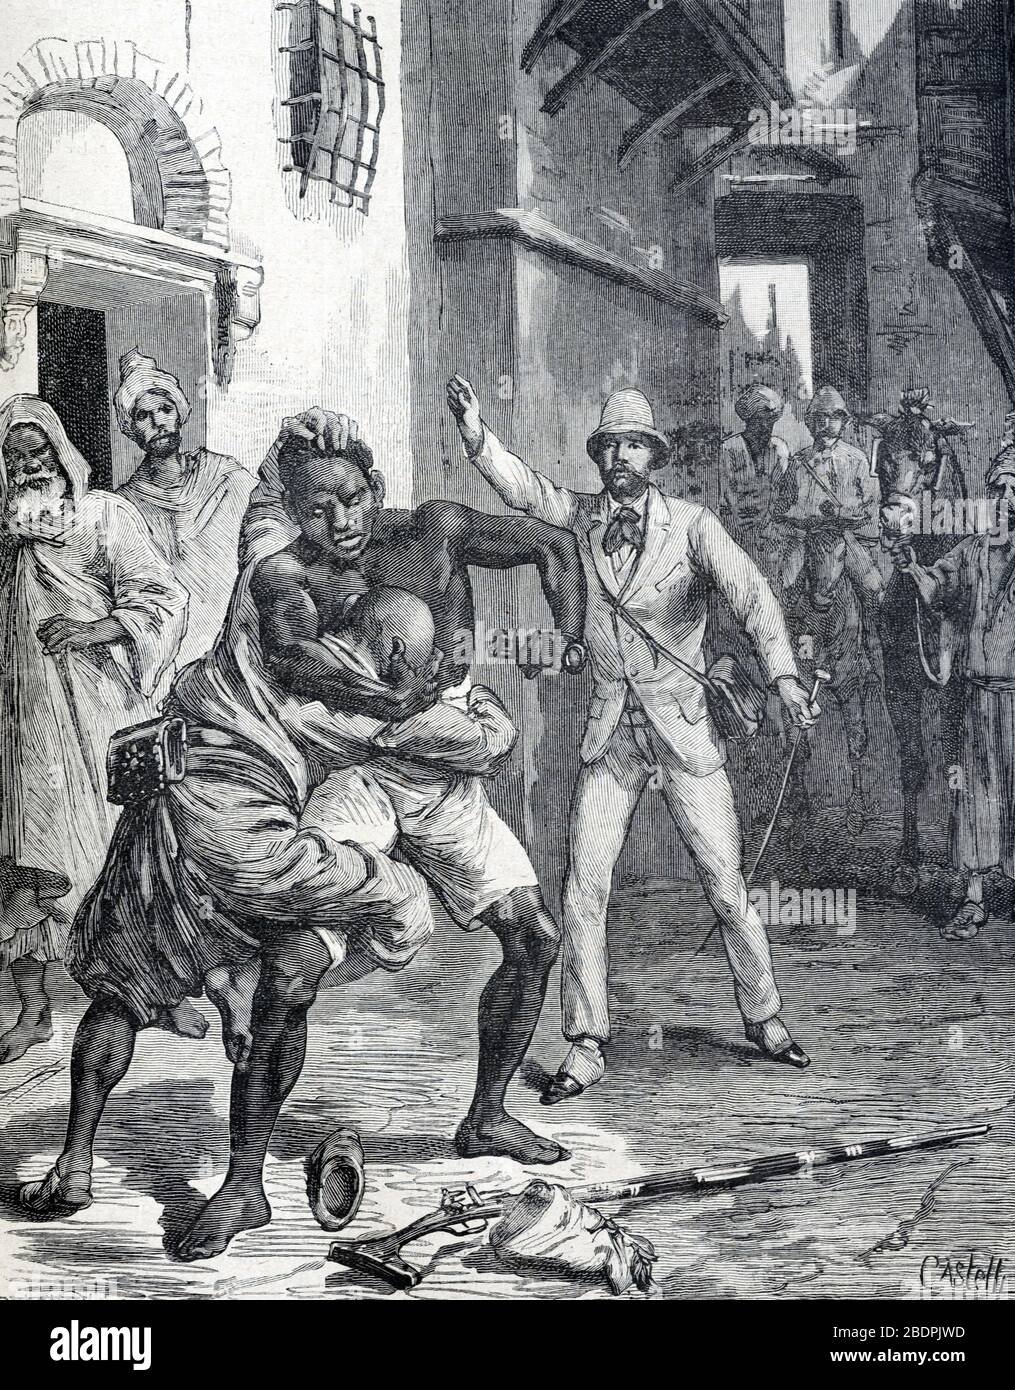 Street Fight o Street Brawl tra Black African e Moroccan Man in Marocco. Vintage o Old Illustration o Engraving 1866 Foto Stock